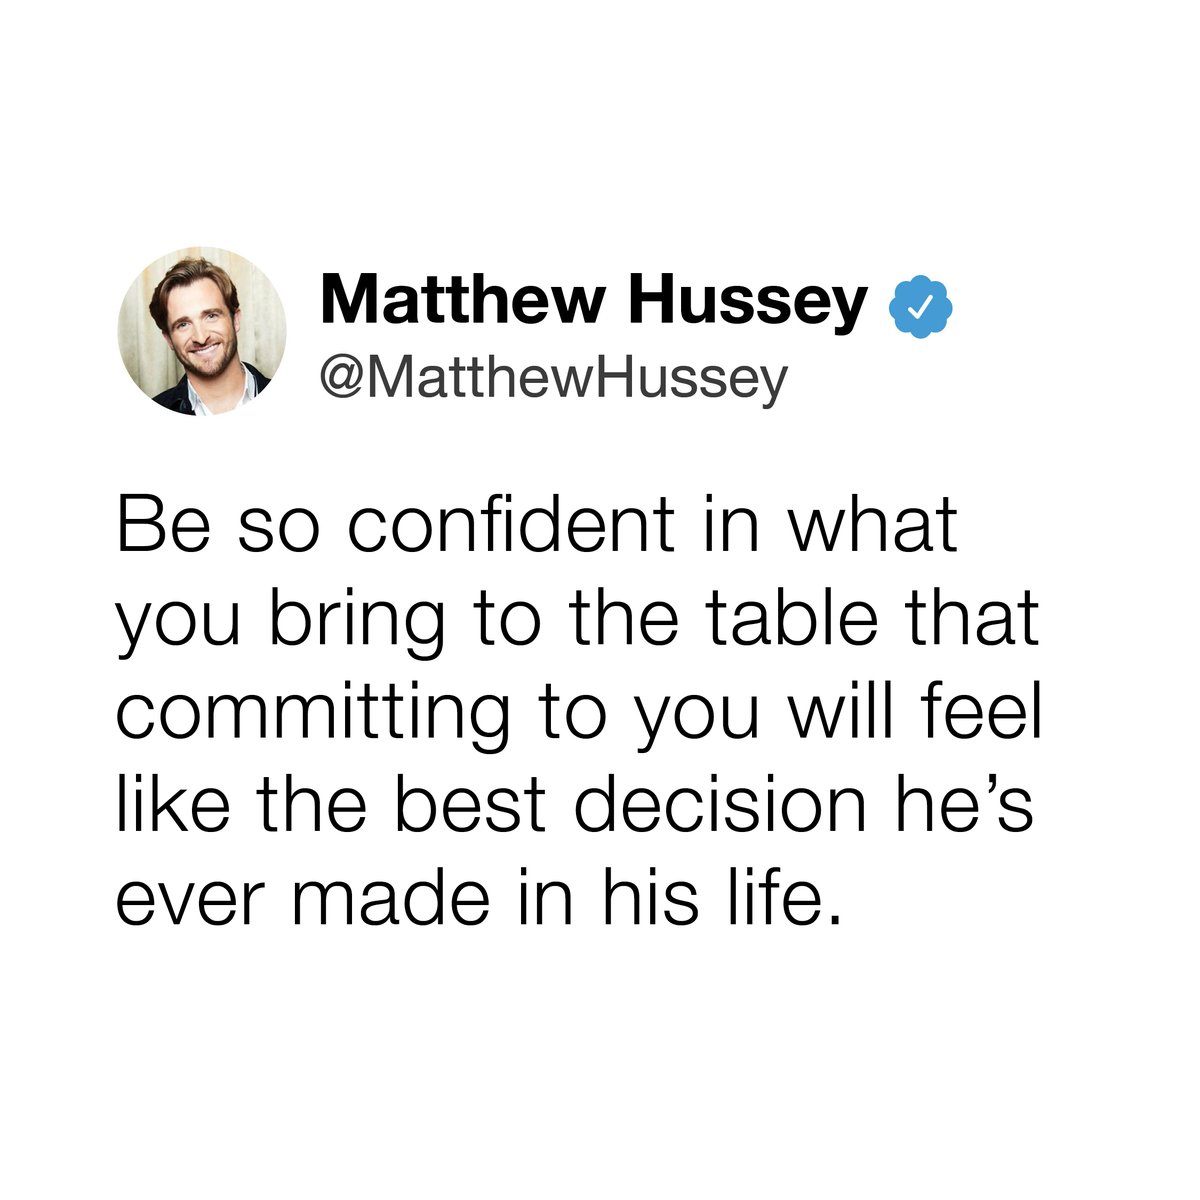 Matthew Hussey on Twitter: "What do you bring to the table? Tell me in the  comments. https://t.co/HEb2rtvl0U" / Twitter